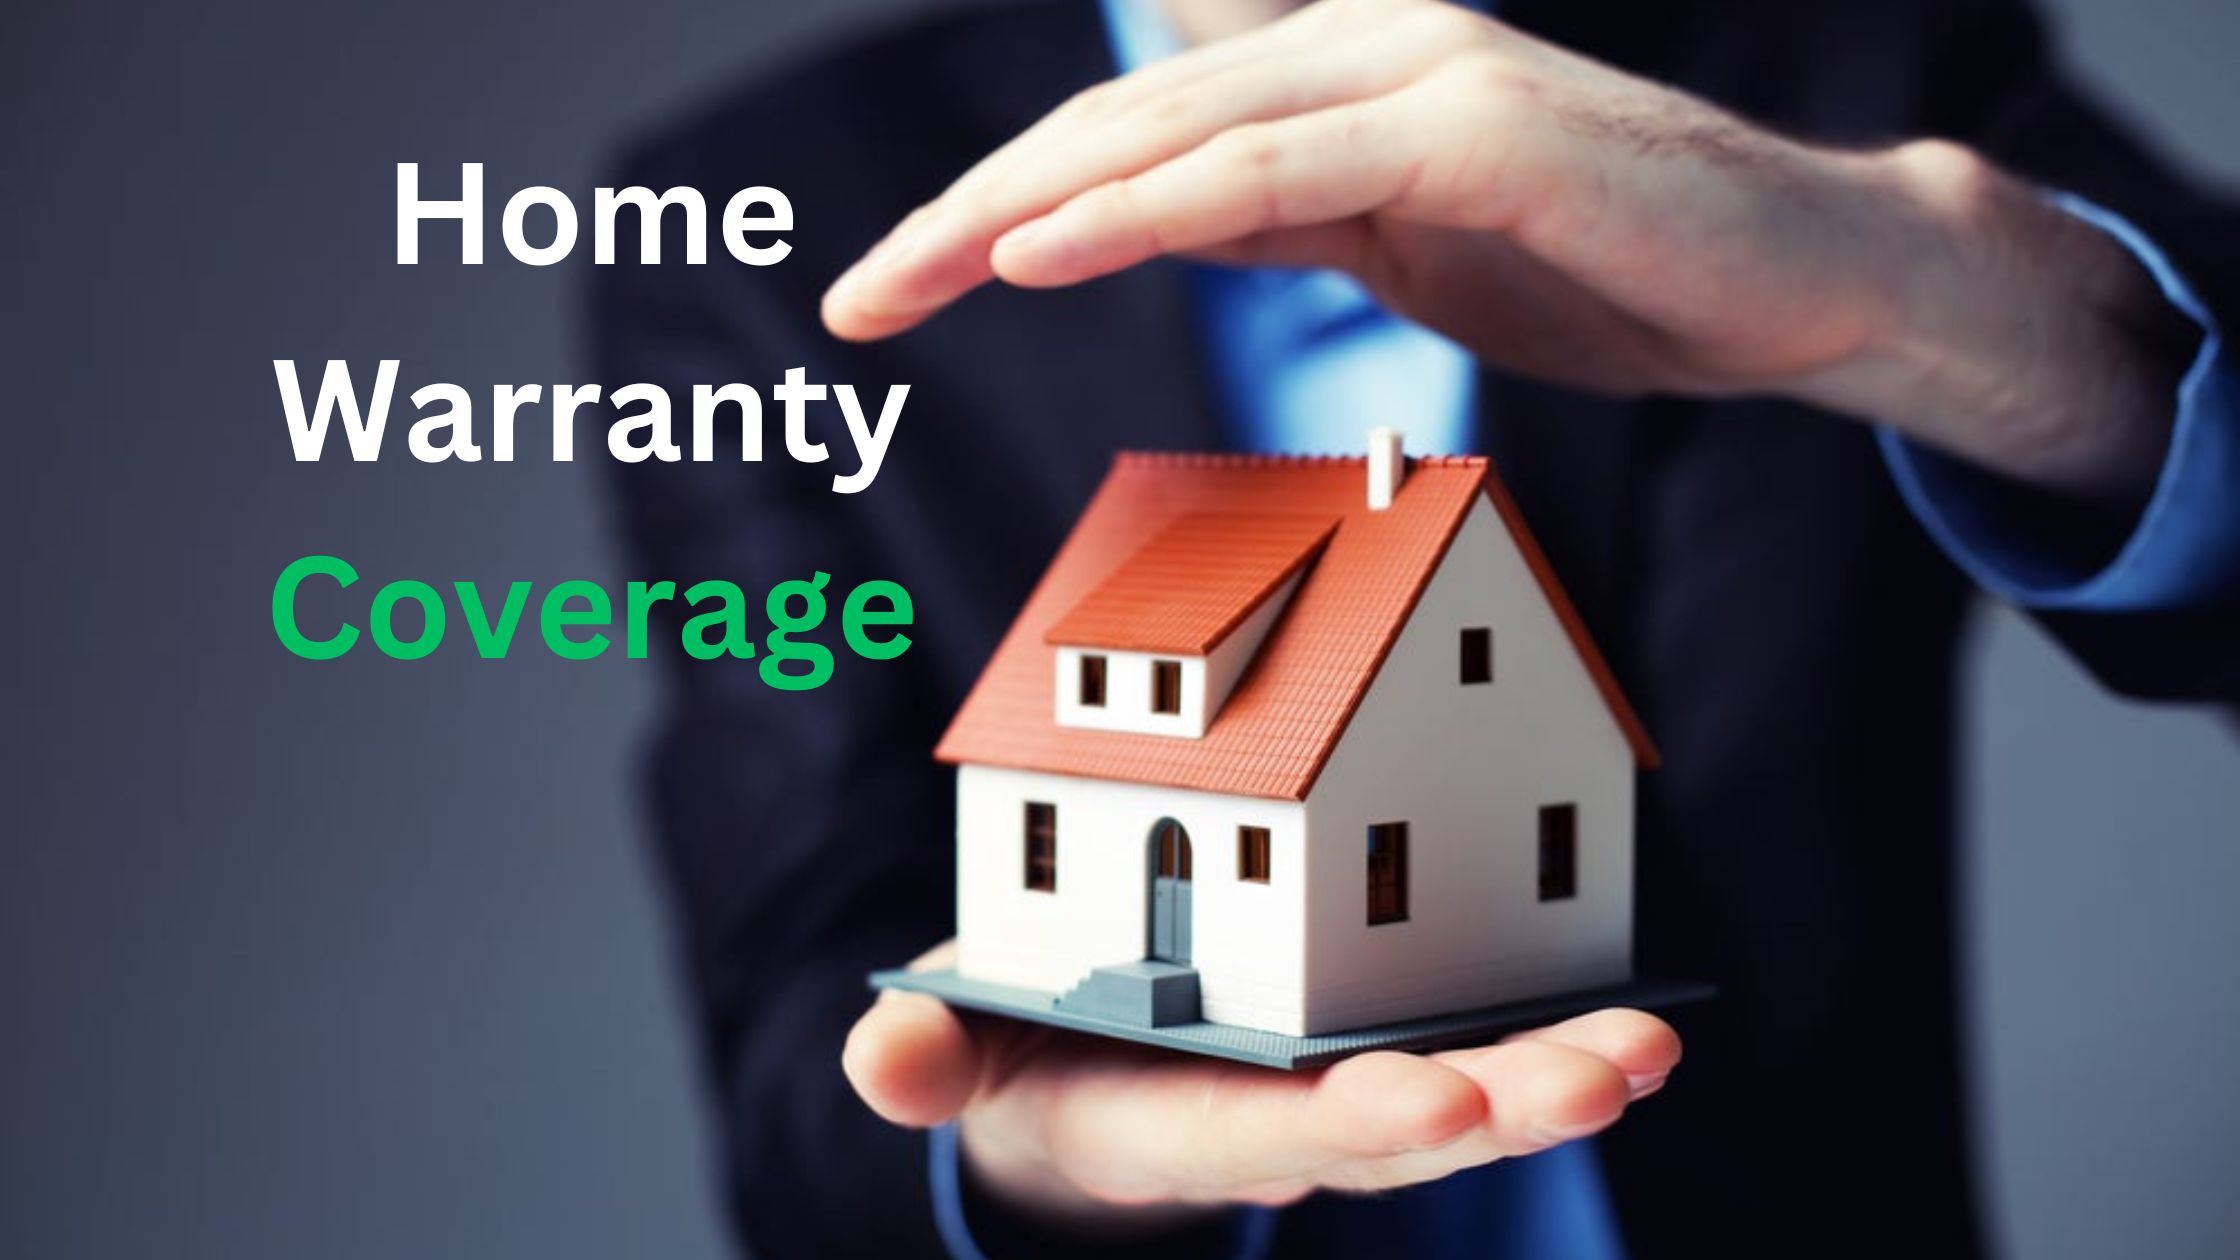 What You Need to Know About Home Warranty Coverage